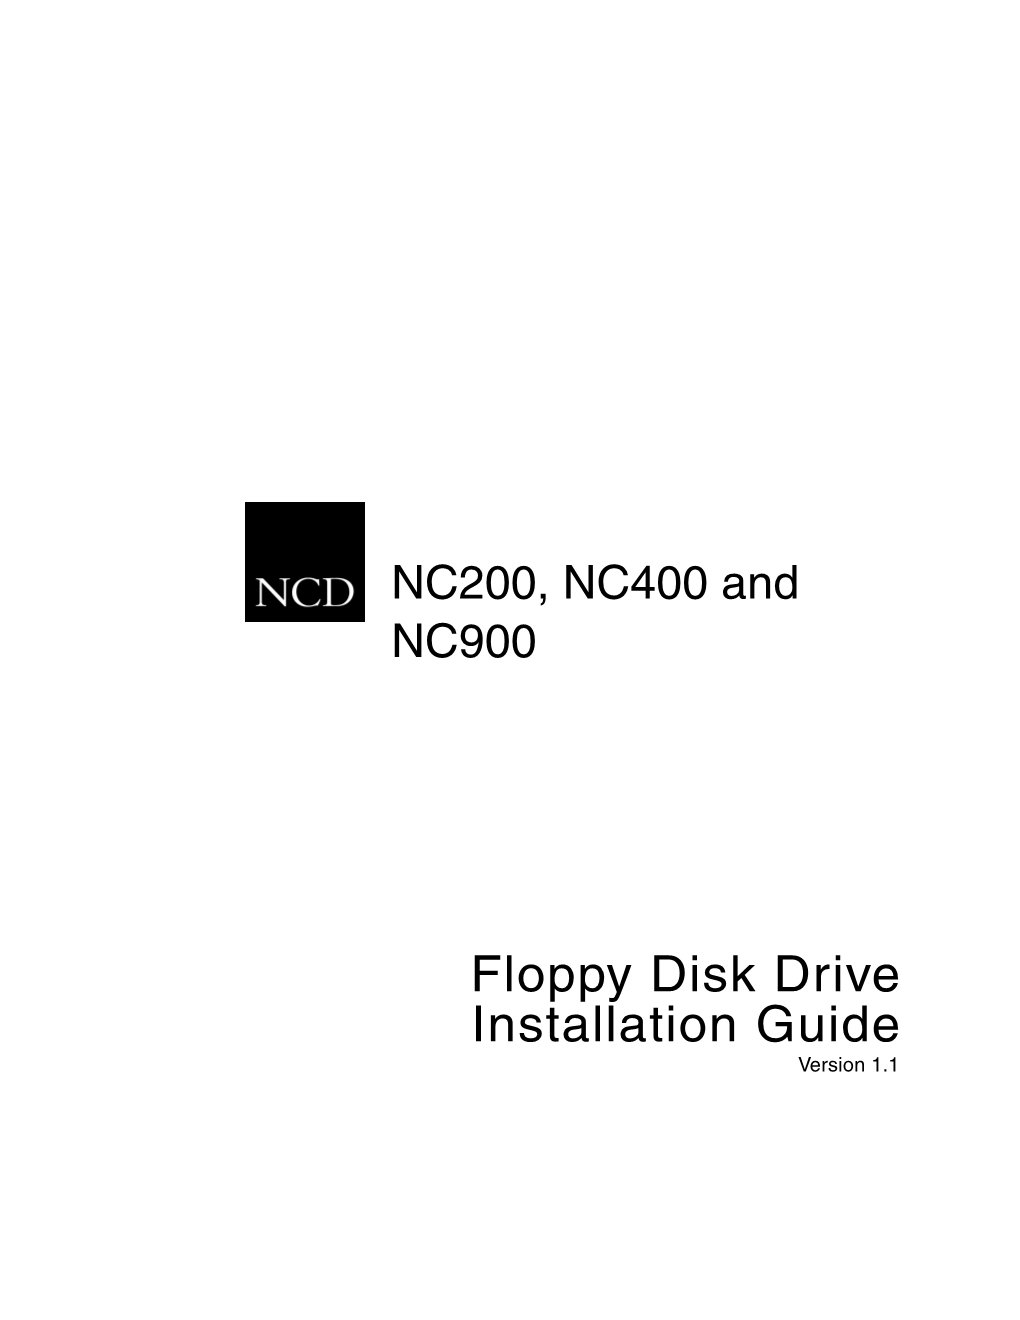 Floppy Disk Drive Installation Guide Version 1.1 Copyright Copyright © 1999, 2000 by Network Computing Devices, Inc